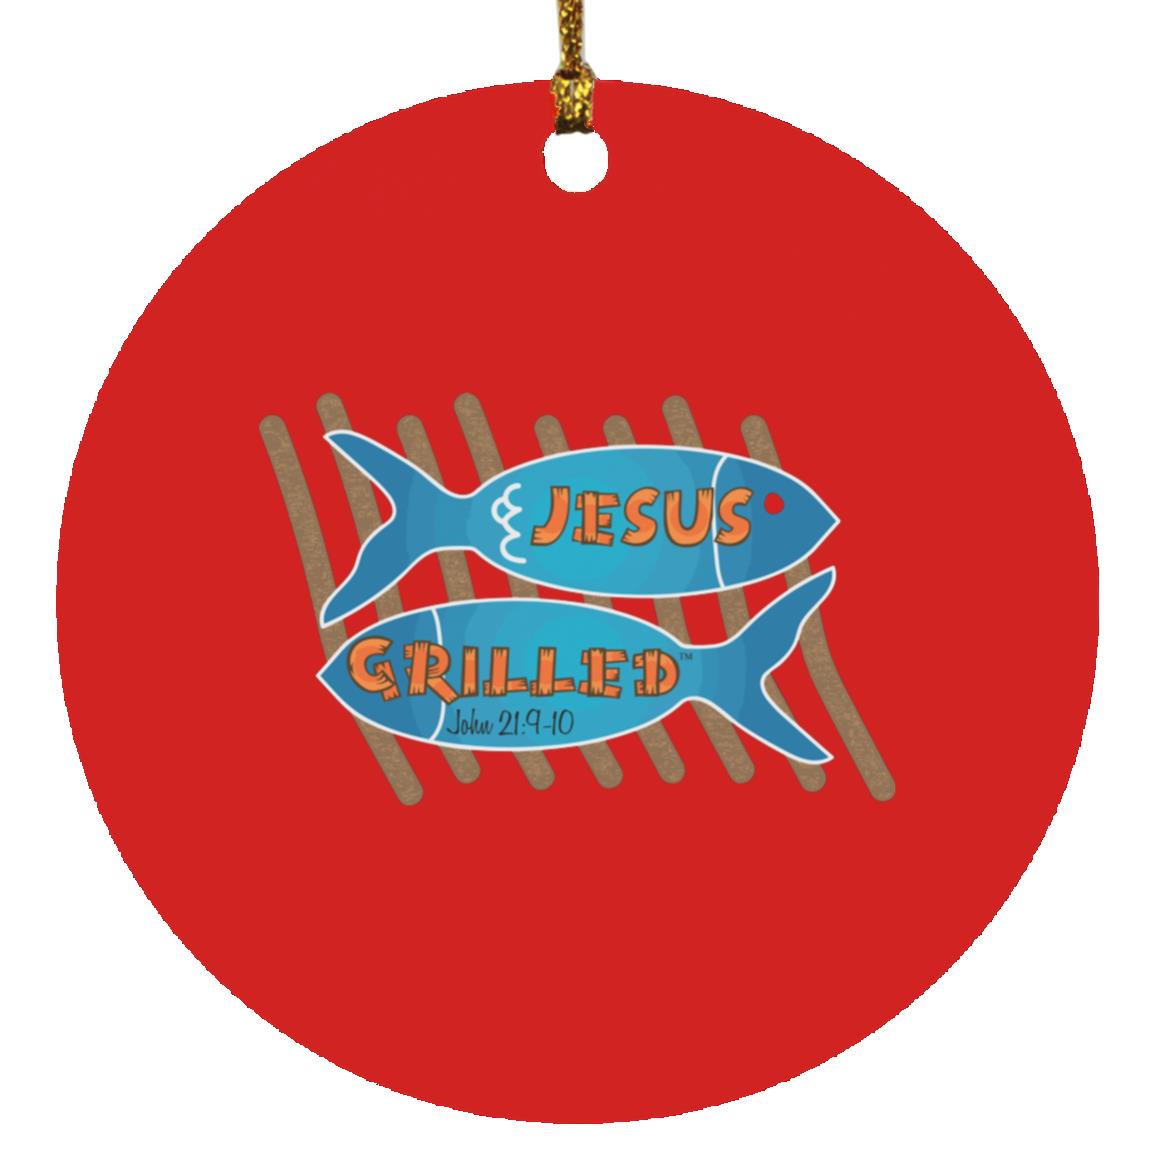 Grilled Fish Circle Ornament